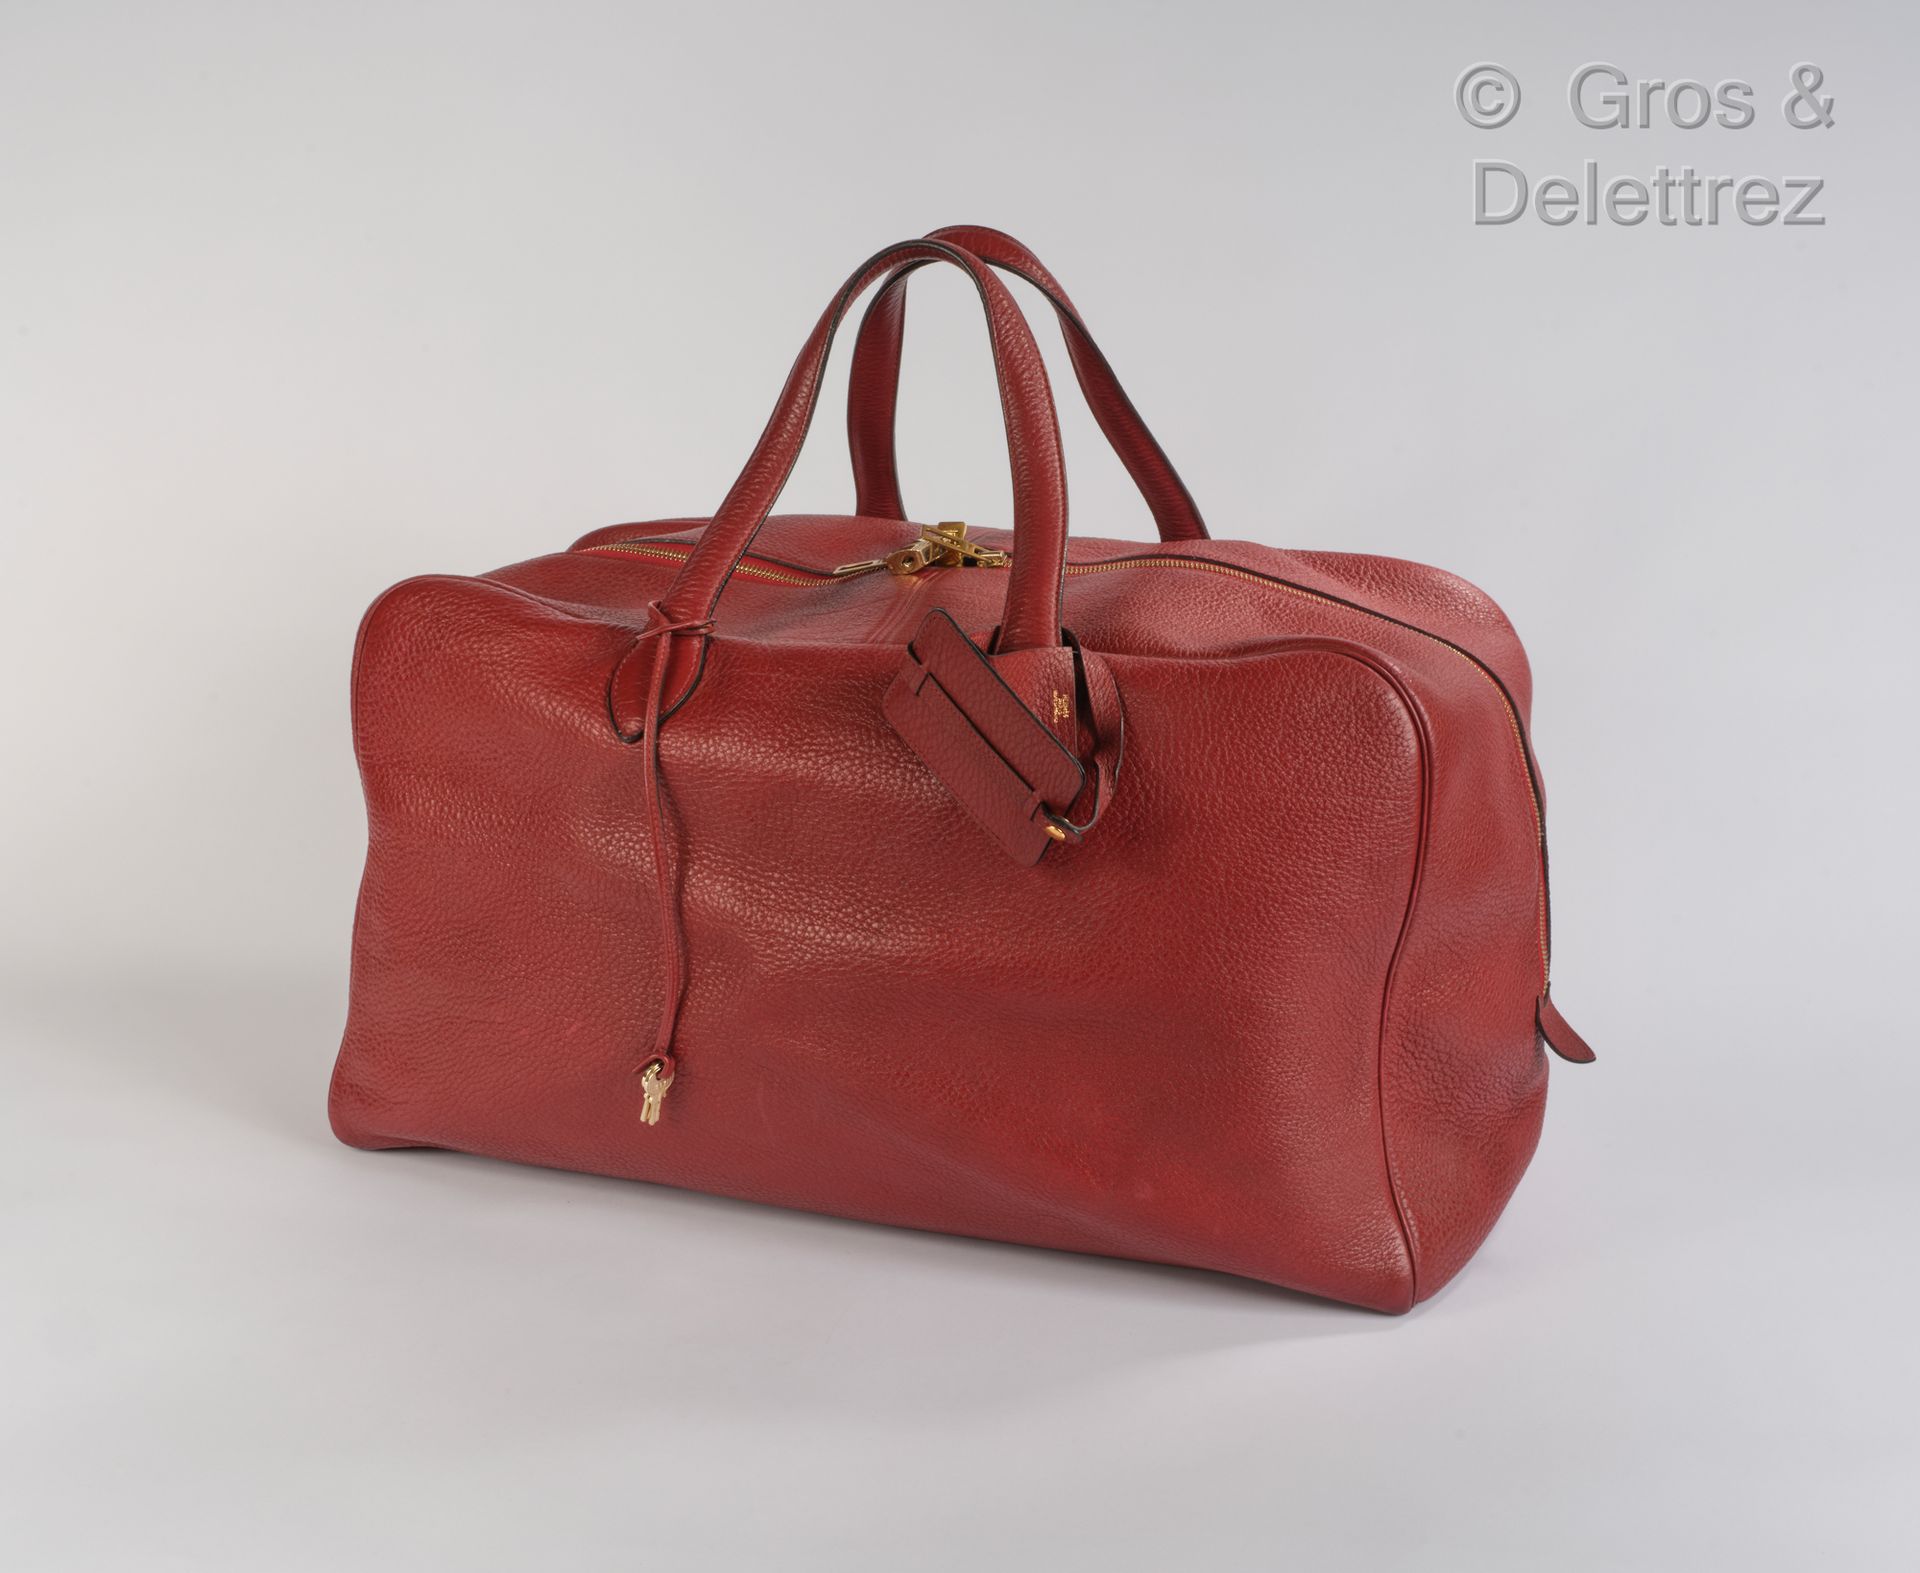 HERMÈS Paris made in France Victoria" travel bag 50cm in red taurillon clémence,&hellip;